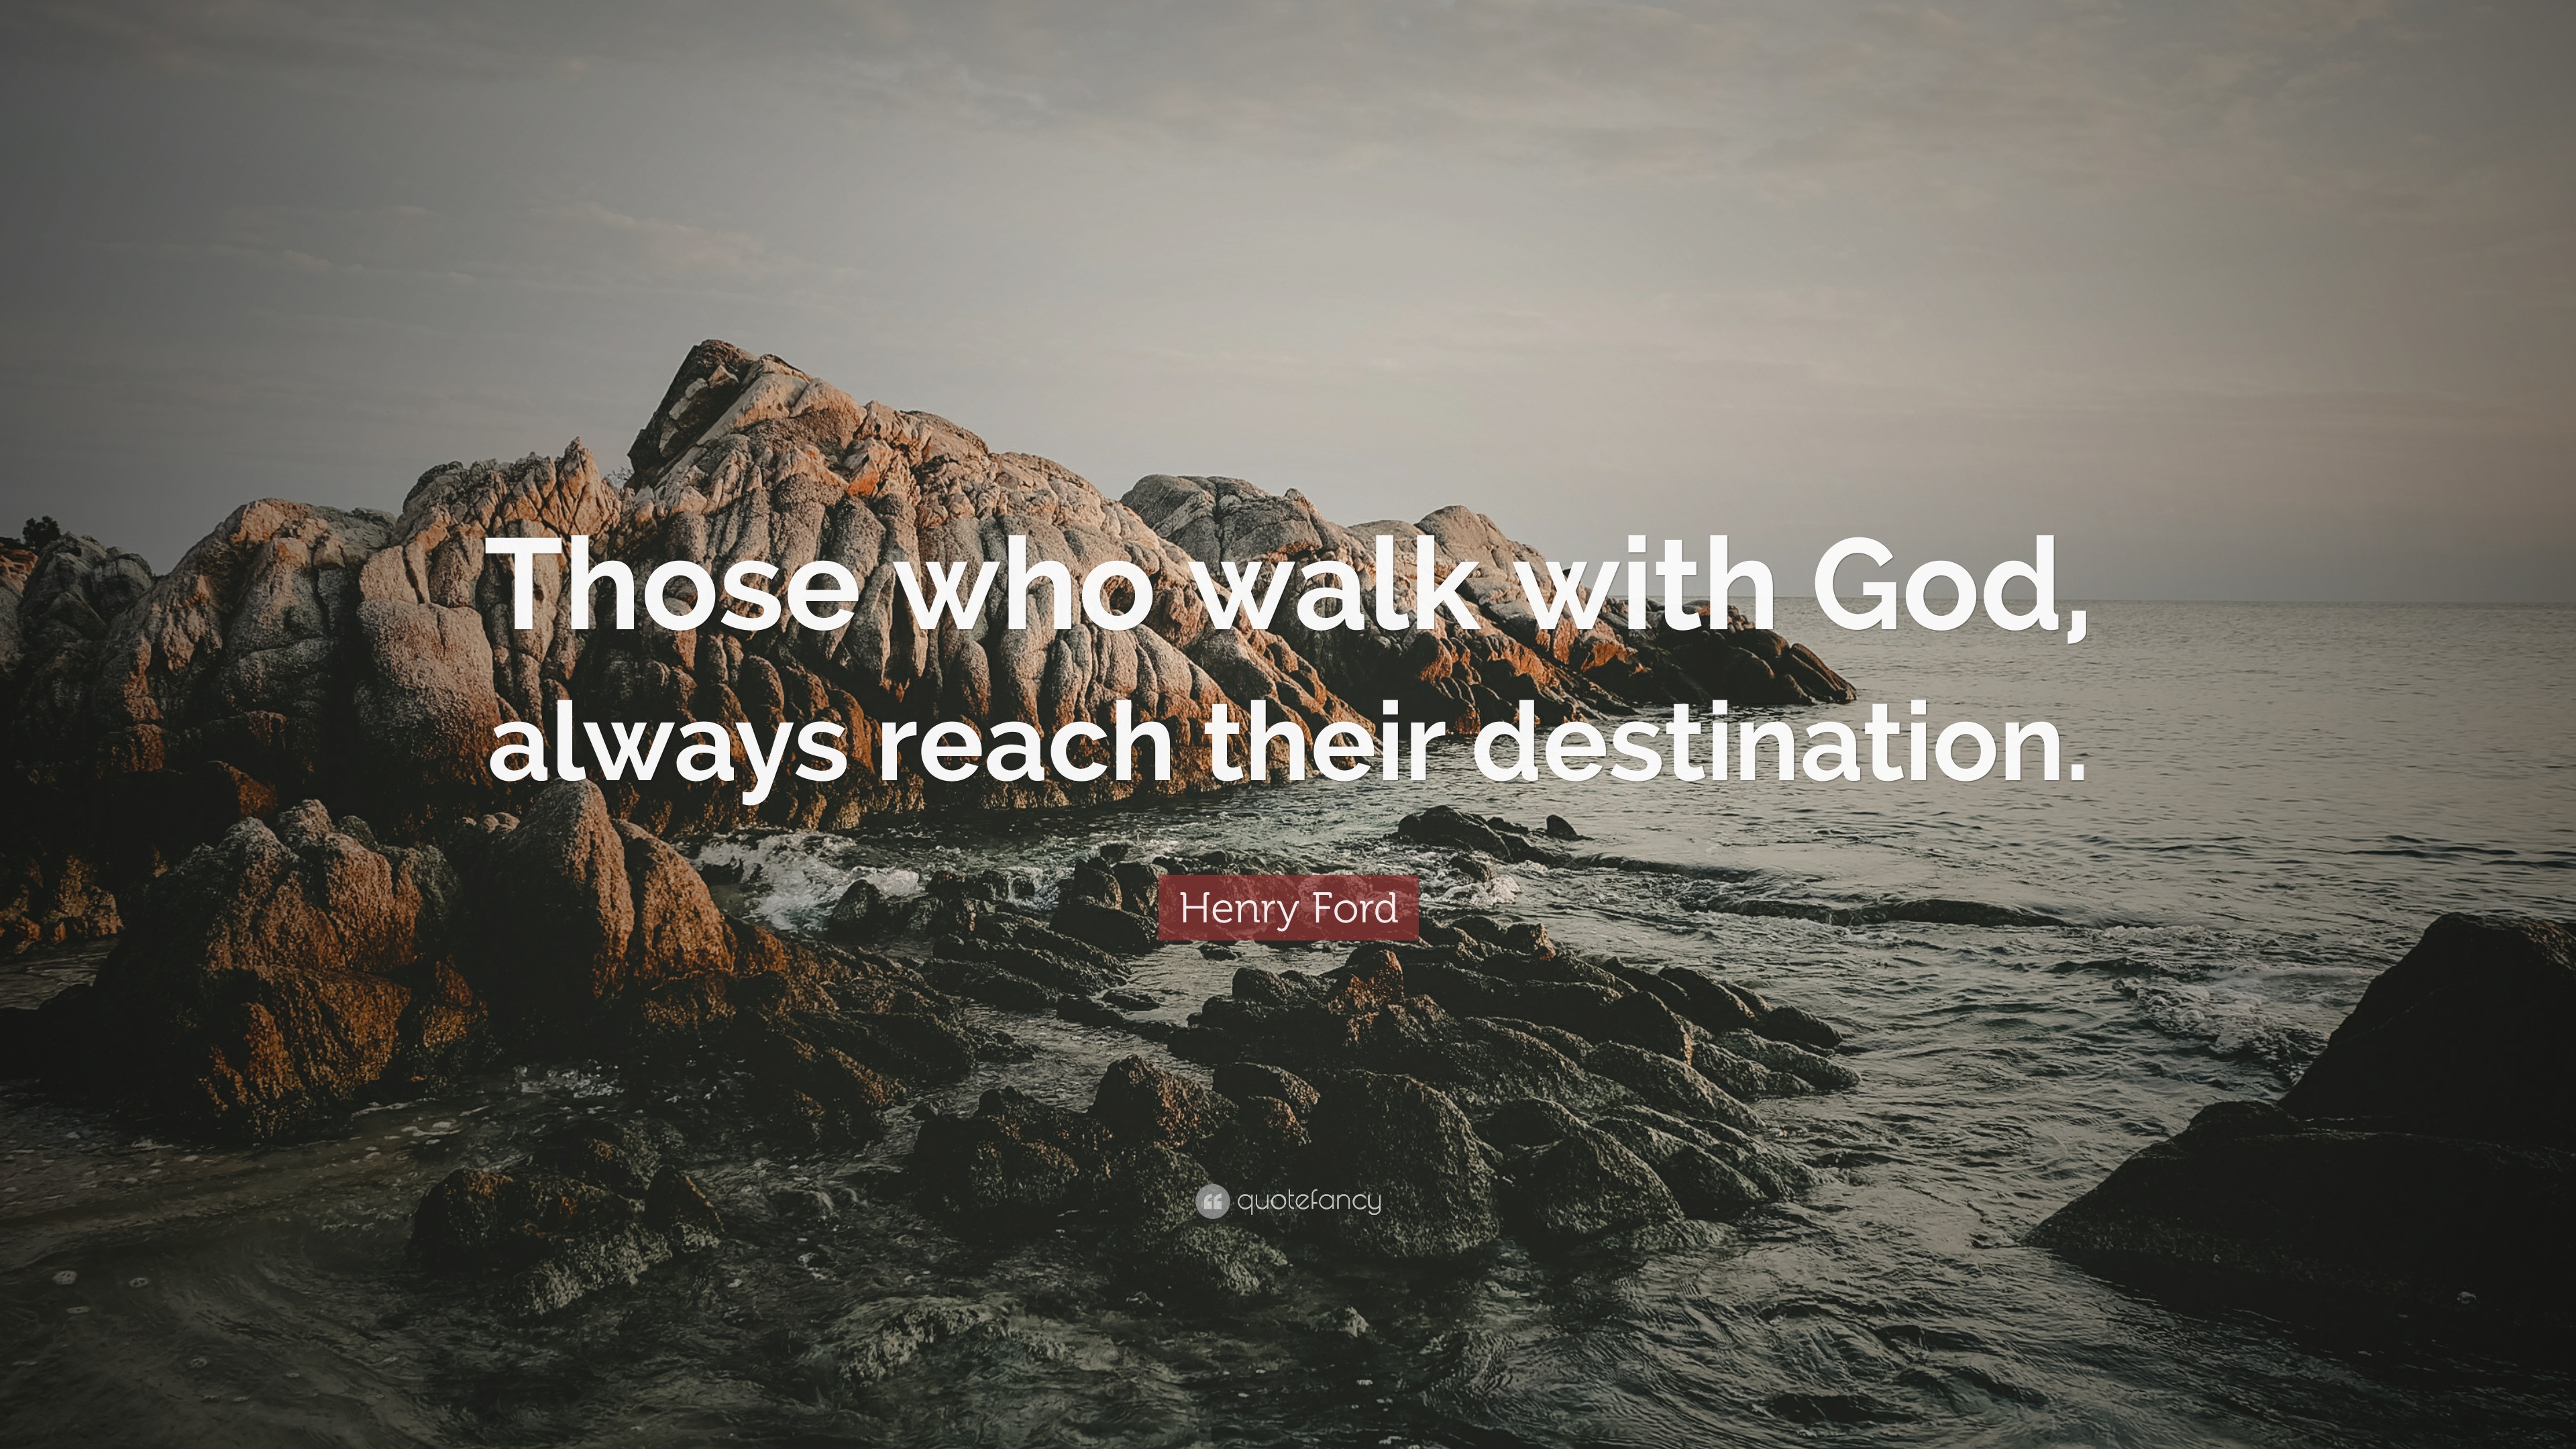 Henry Ford Quote: “Those who walk with God, always reach their ...